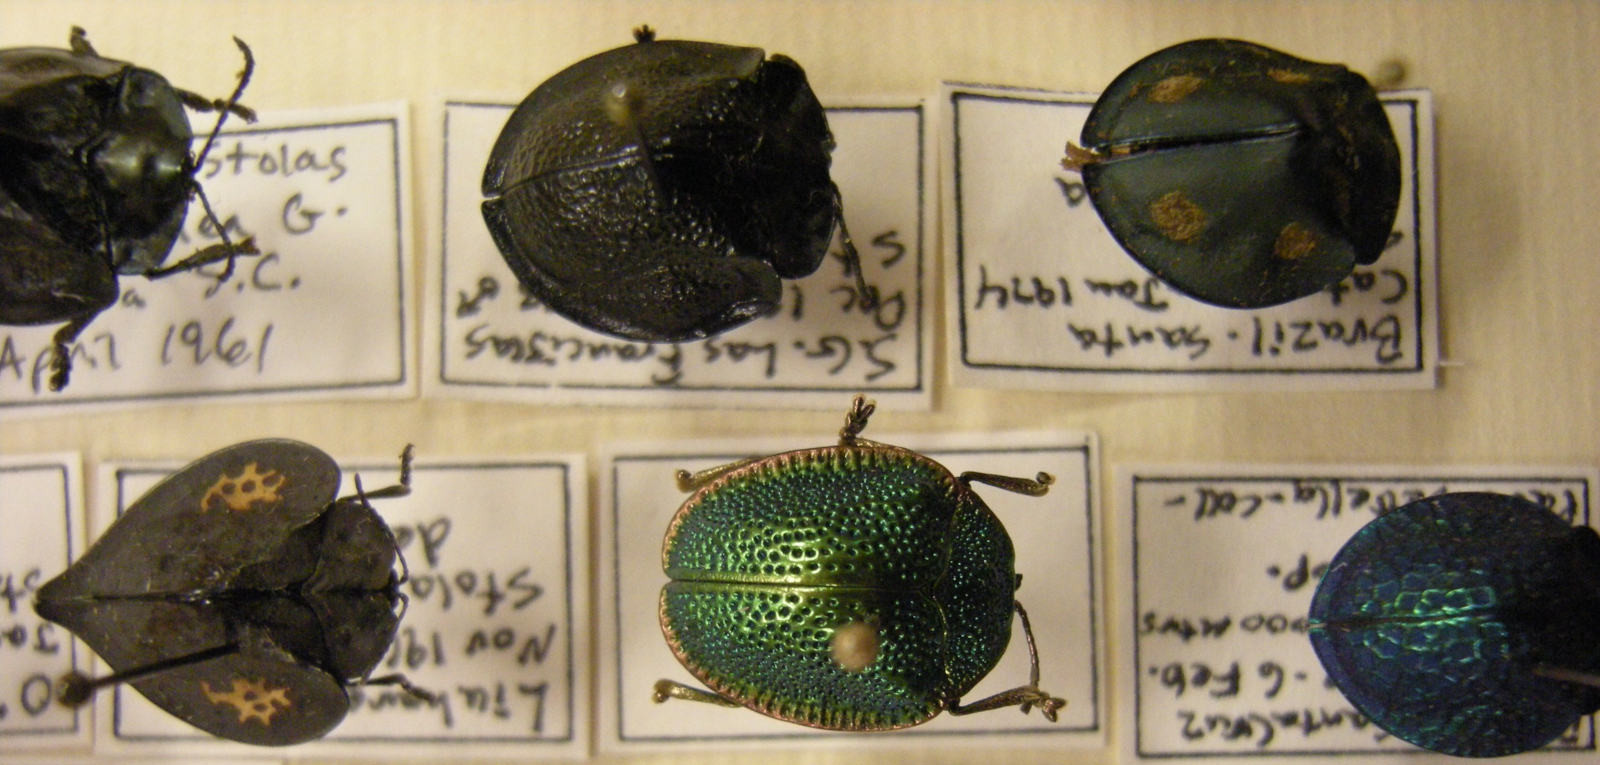 Unidentified Tortoise Beetles. Part of Don Ehlen's 'Insect Safari' collection. — https://commons.wikimedia.org/wiki/File:Insect_Safari_-_beetle_36.jpg — Joe Mabel